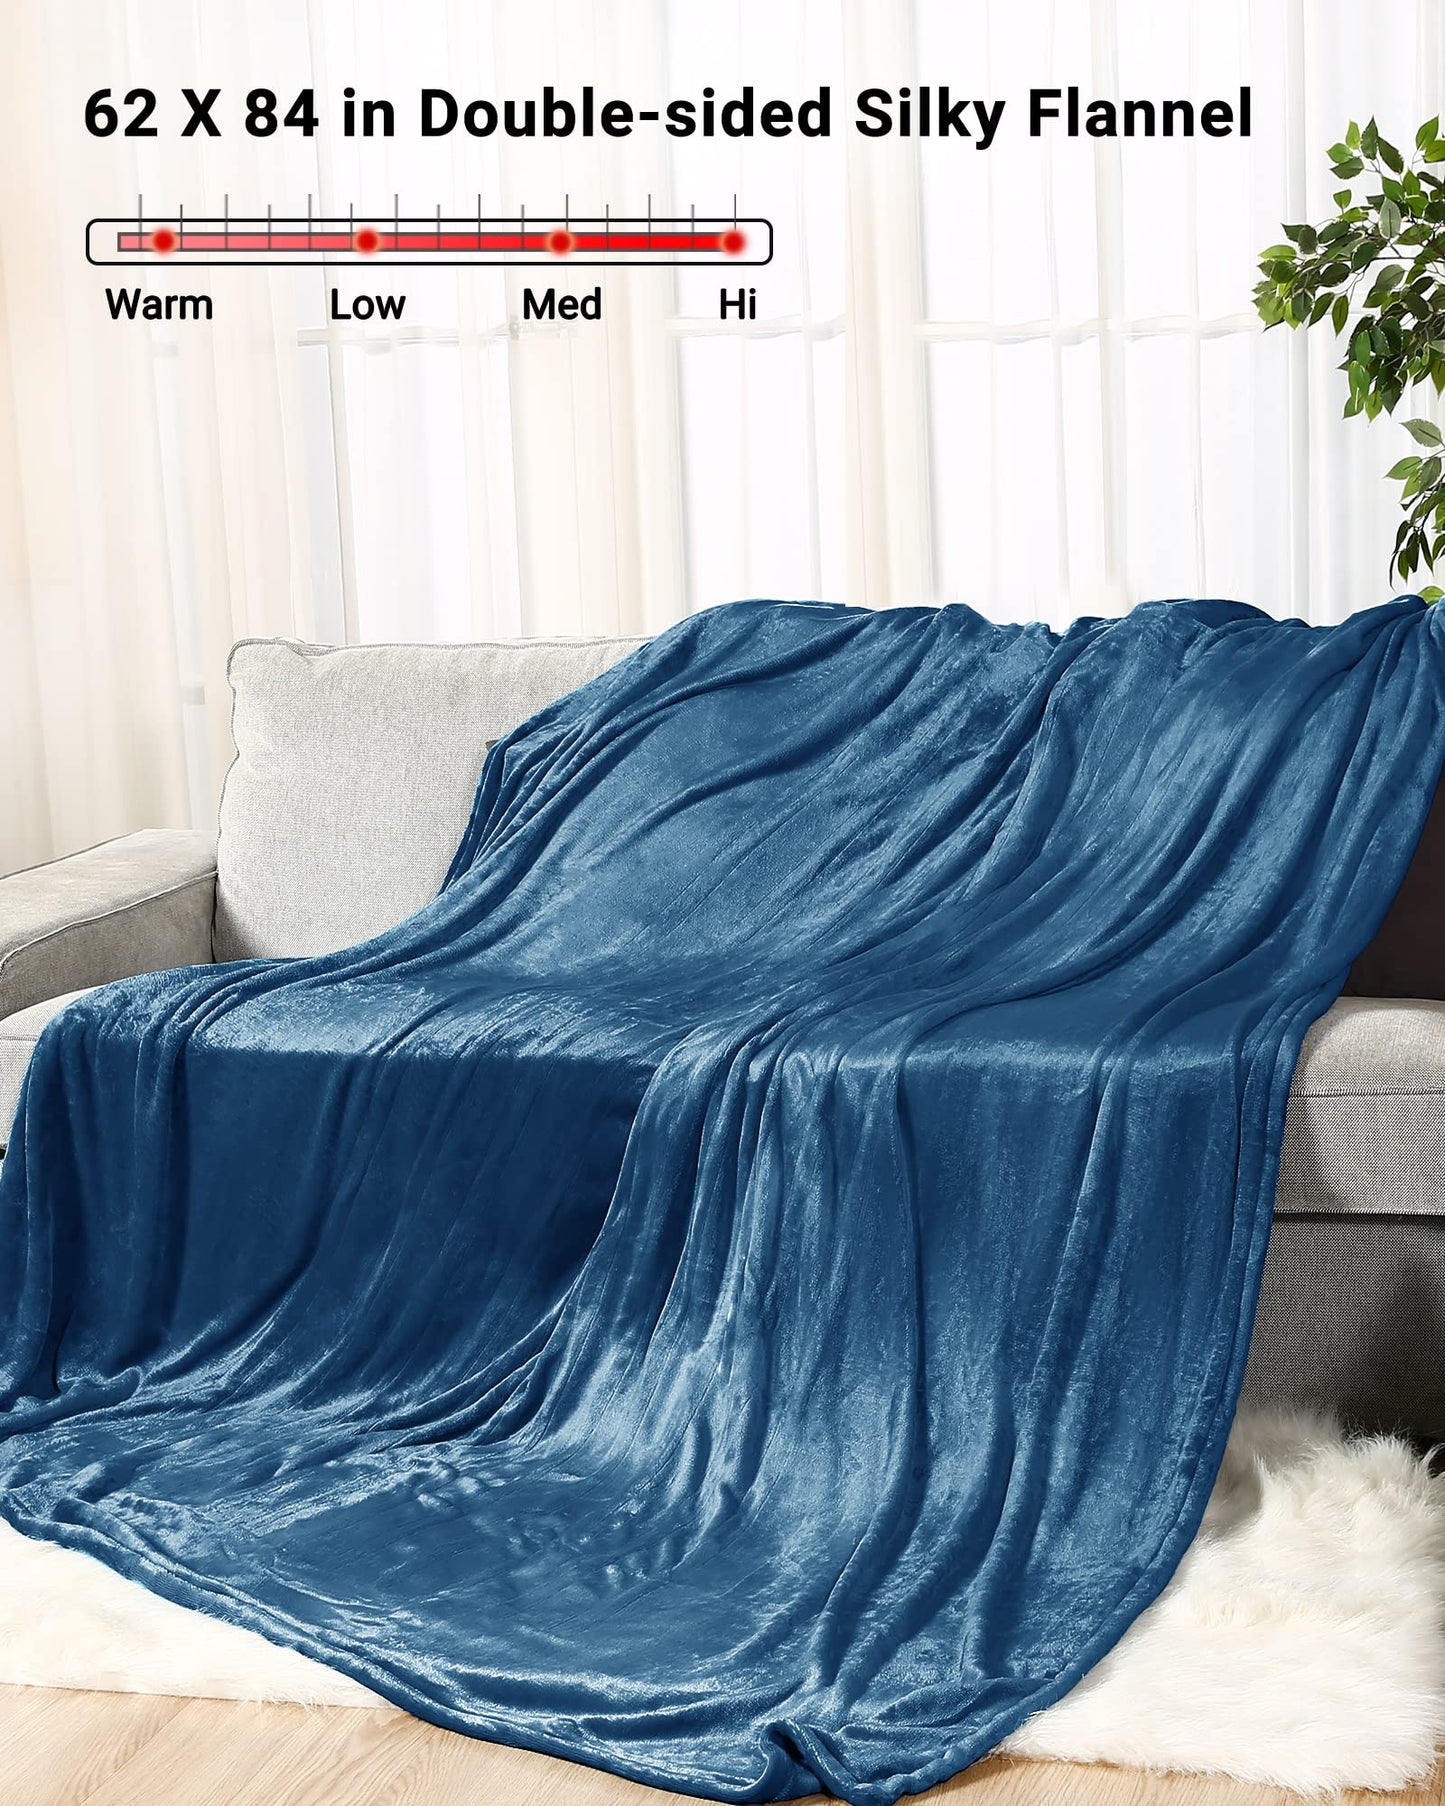 Electric Blanket 62 x 84 Inches Heated Reversible Flannel Blanket Twin Size with 10 Hours Auto Off & 4 Temperature Levels & ETL Certification, Home Office Use & Machine Washable, Teal